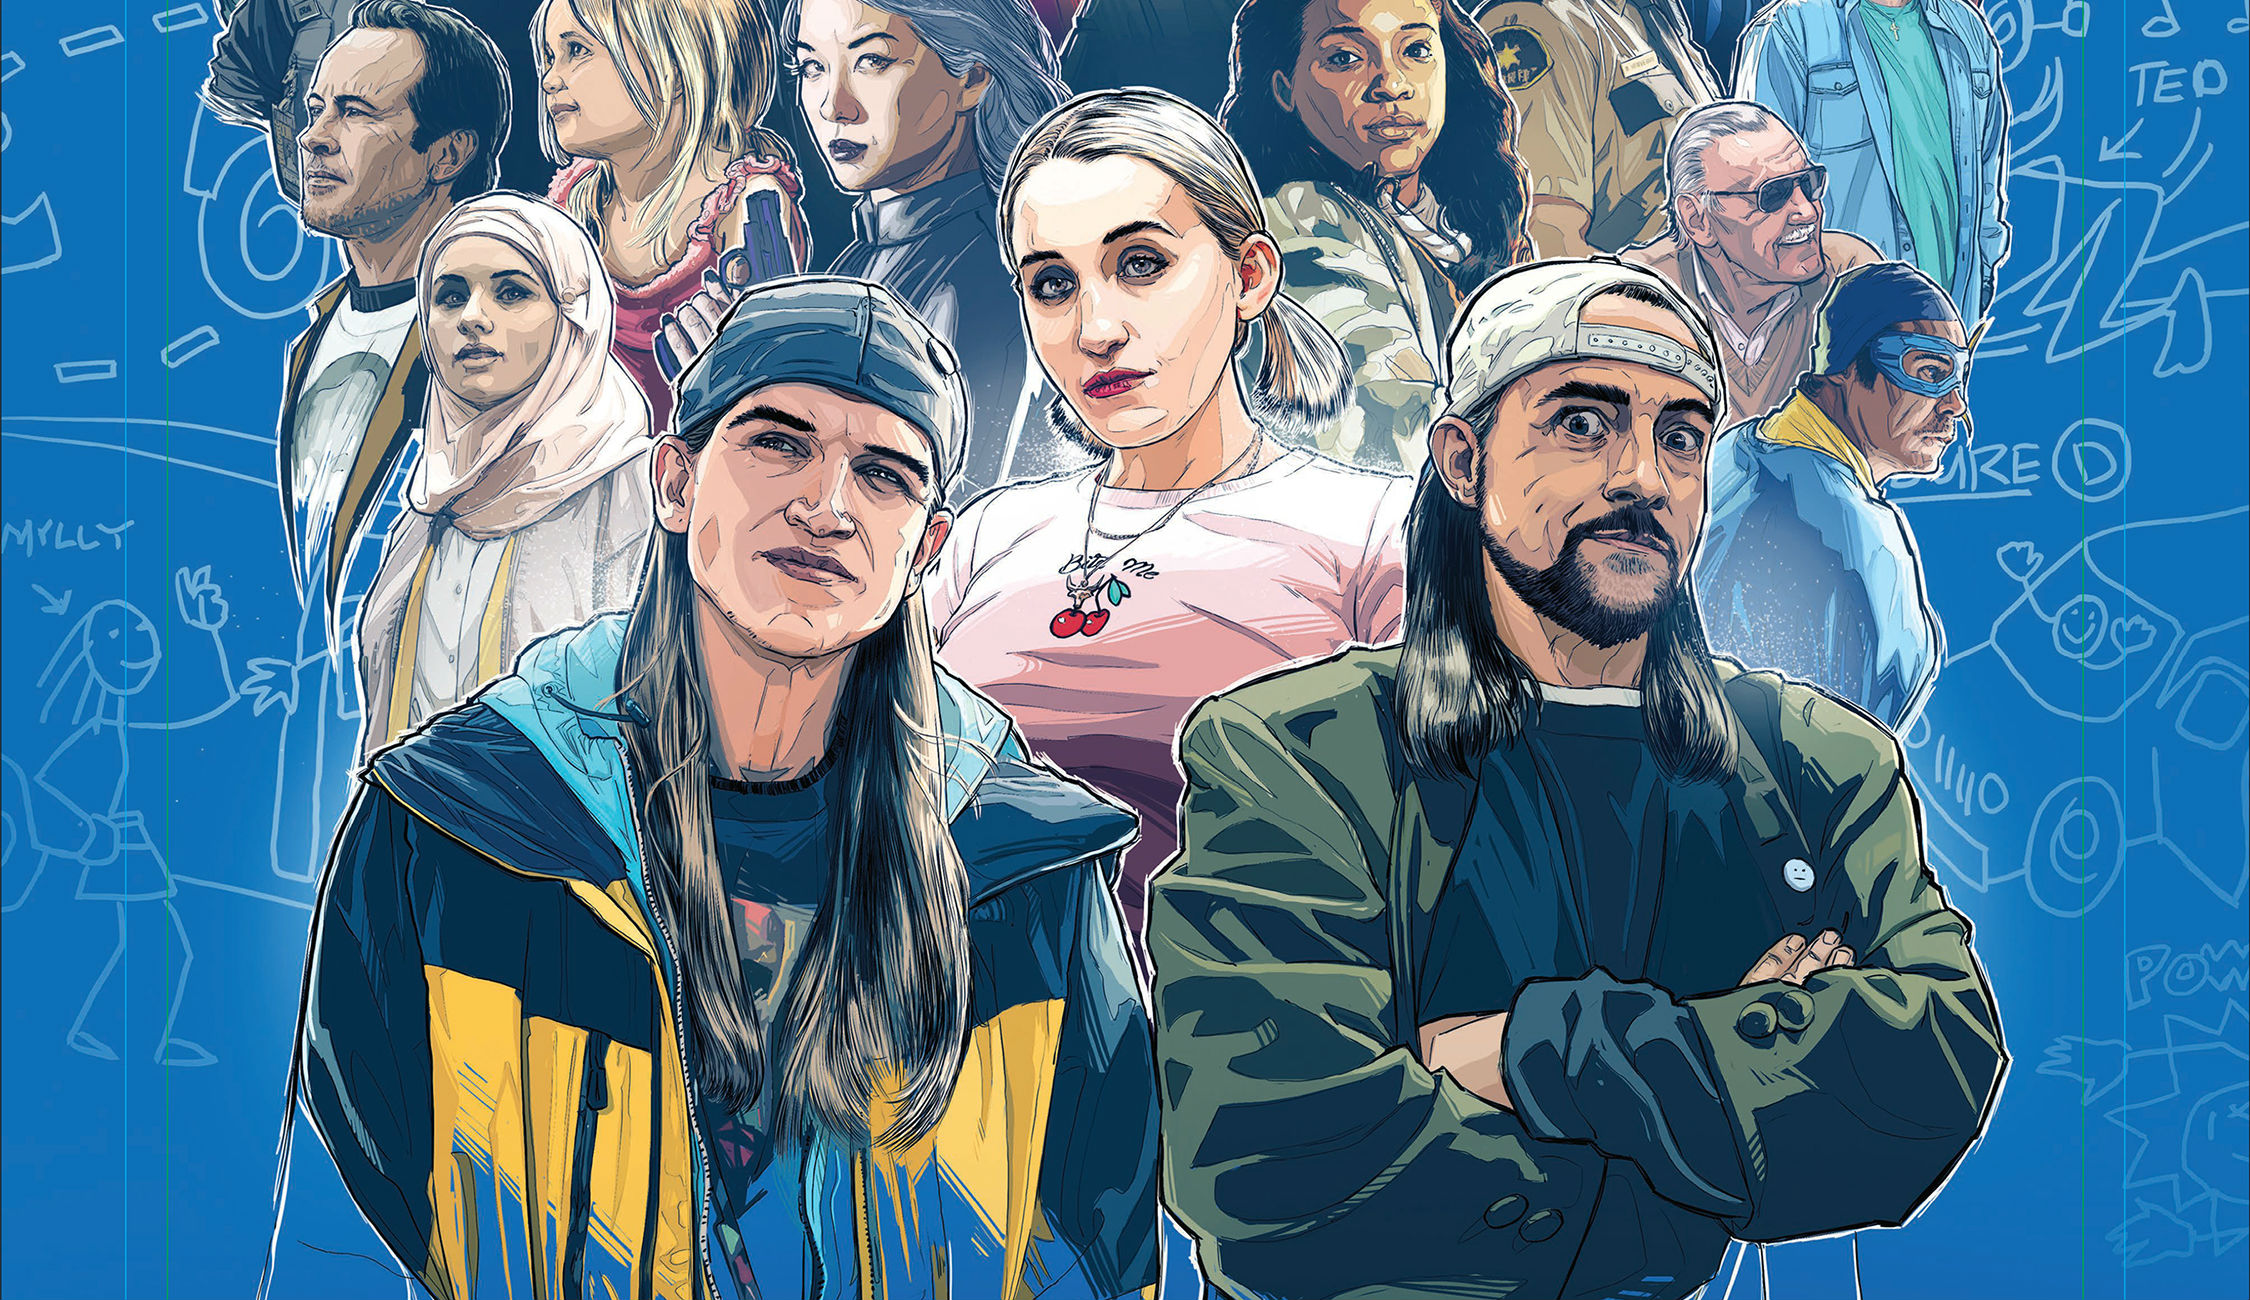 Jay And Silent Bob Reboot Reviews Hit: If You’re A Kevin Smith Fan, Chances Are You’ll Enjoy